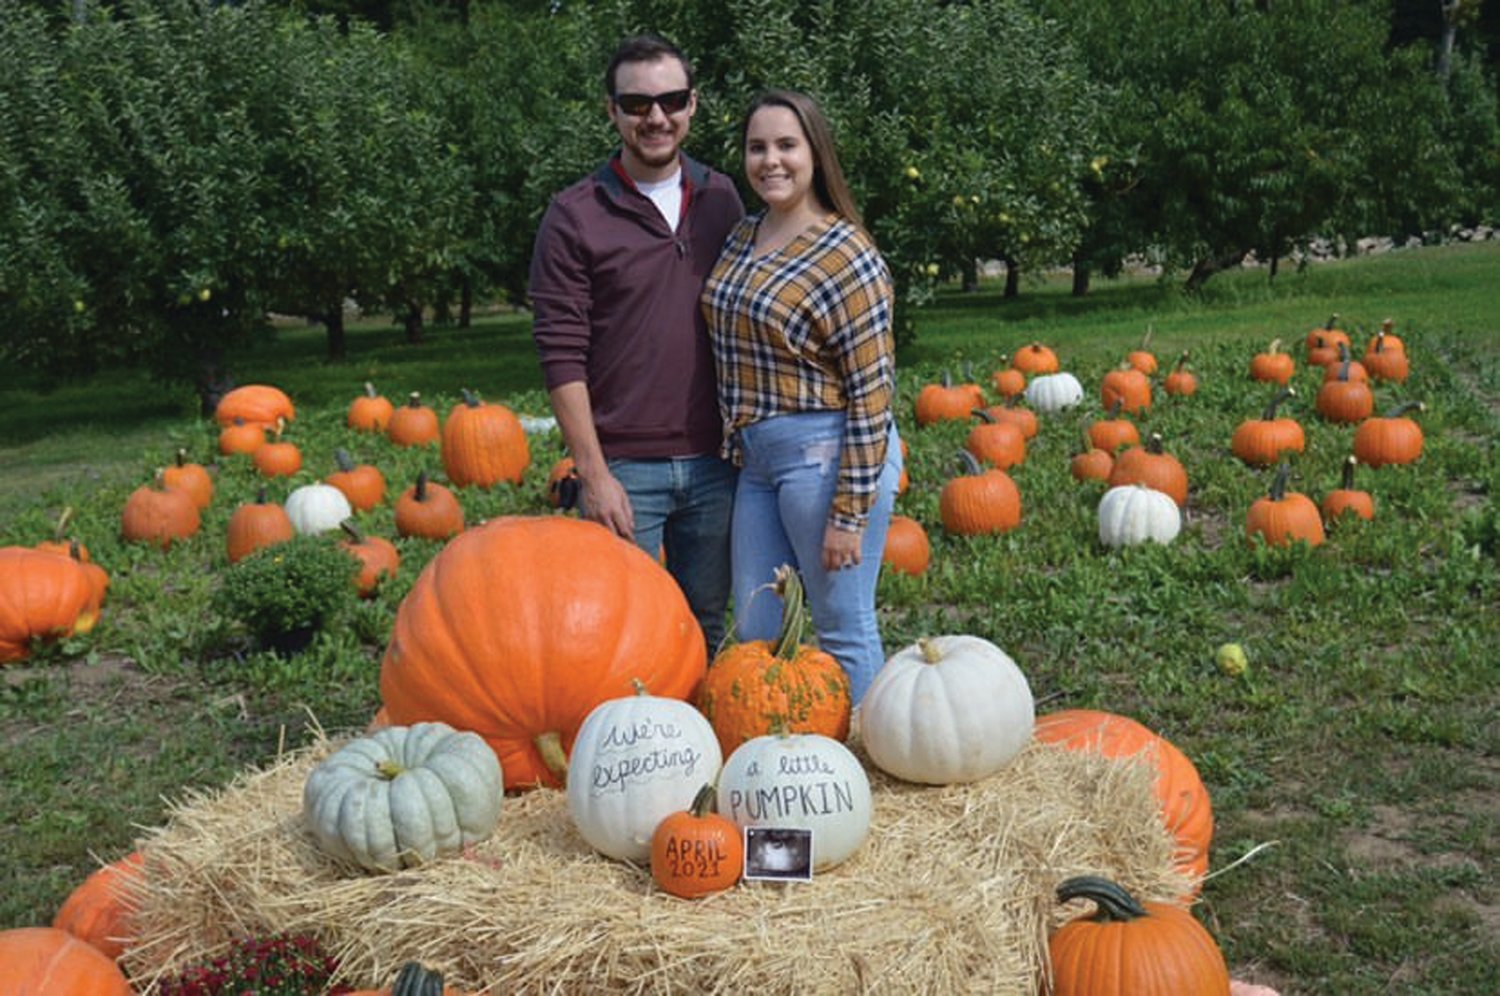 JOHNSTON HELPERS: The orchard owners will be assisted at the Apple Festival by cousin Alex DeNoncour and his fiancé Kaylee Hannagan, both Johnston residents.